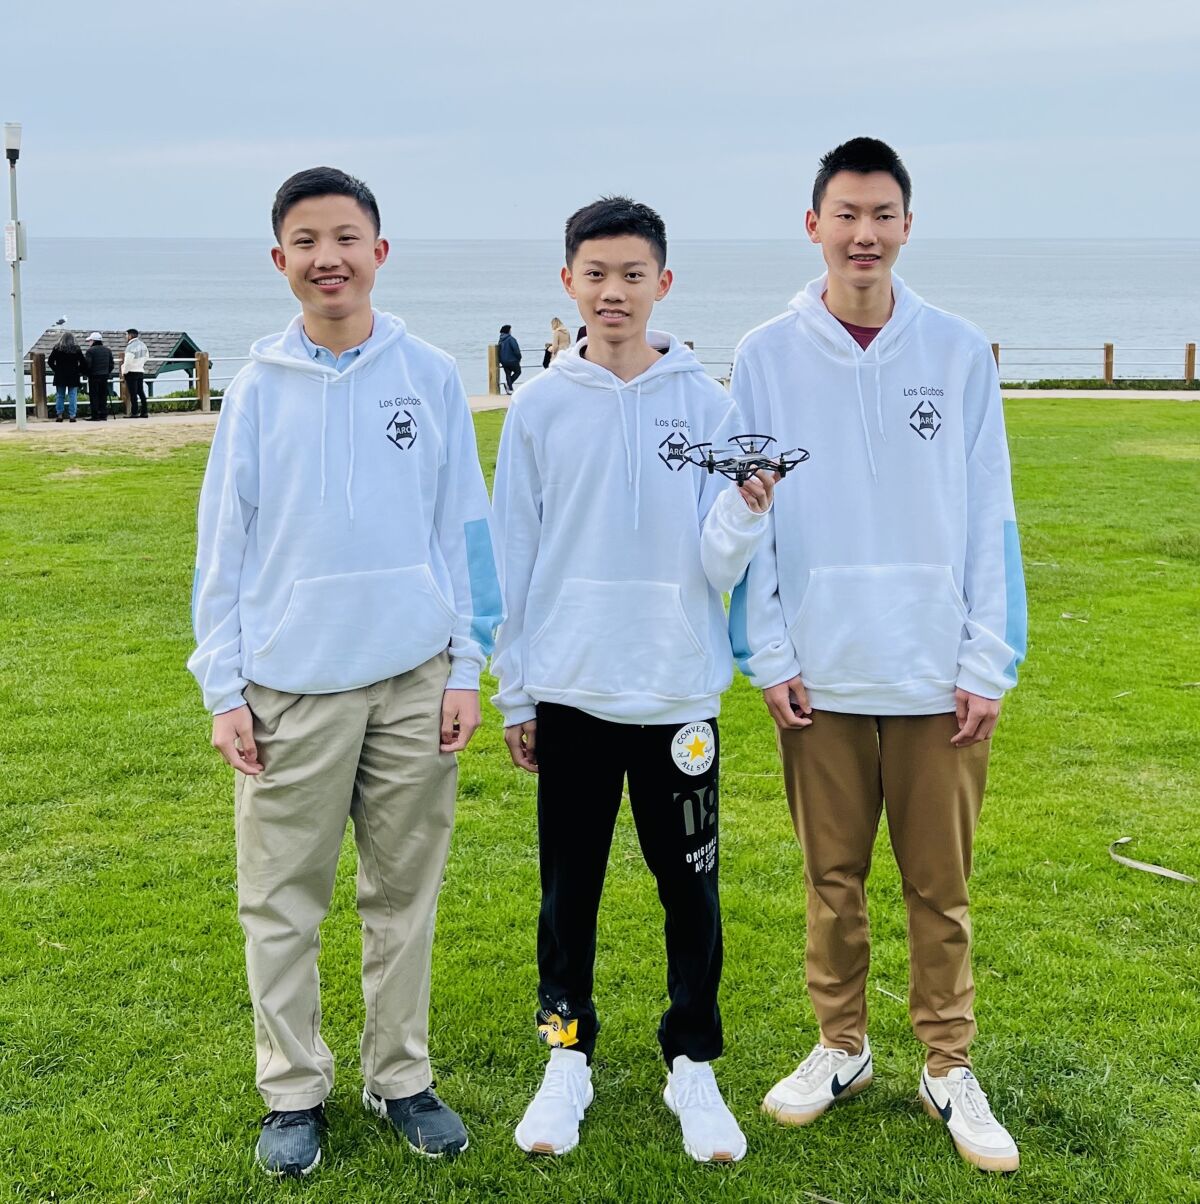 Chris Zheng and Ethan Sun of The Bishop's School and Steve Zhang of Francis Parker School